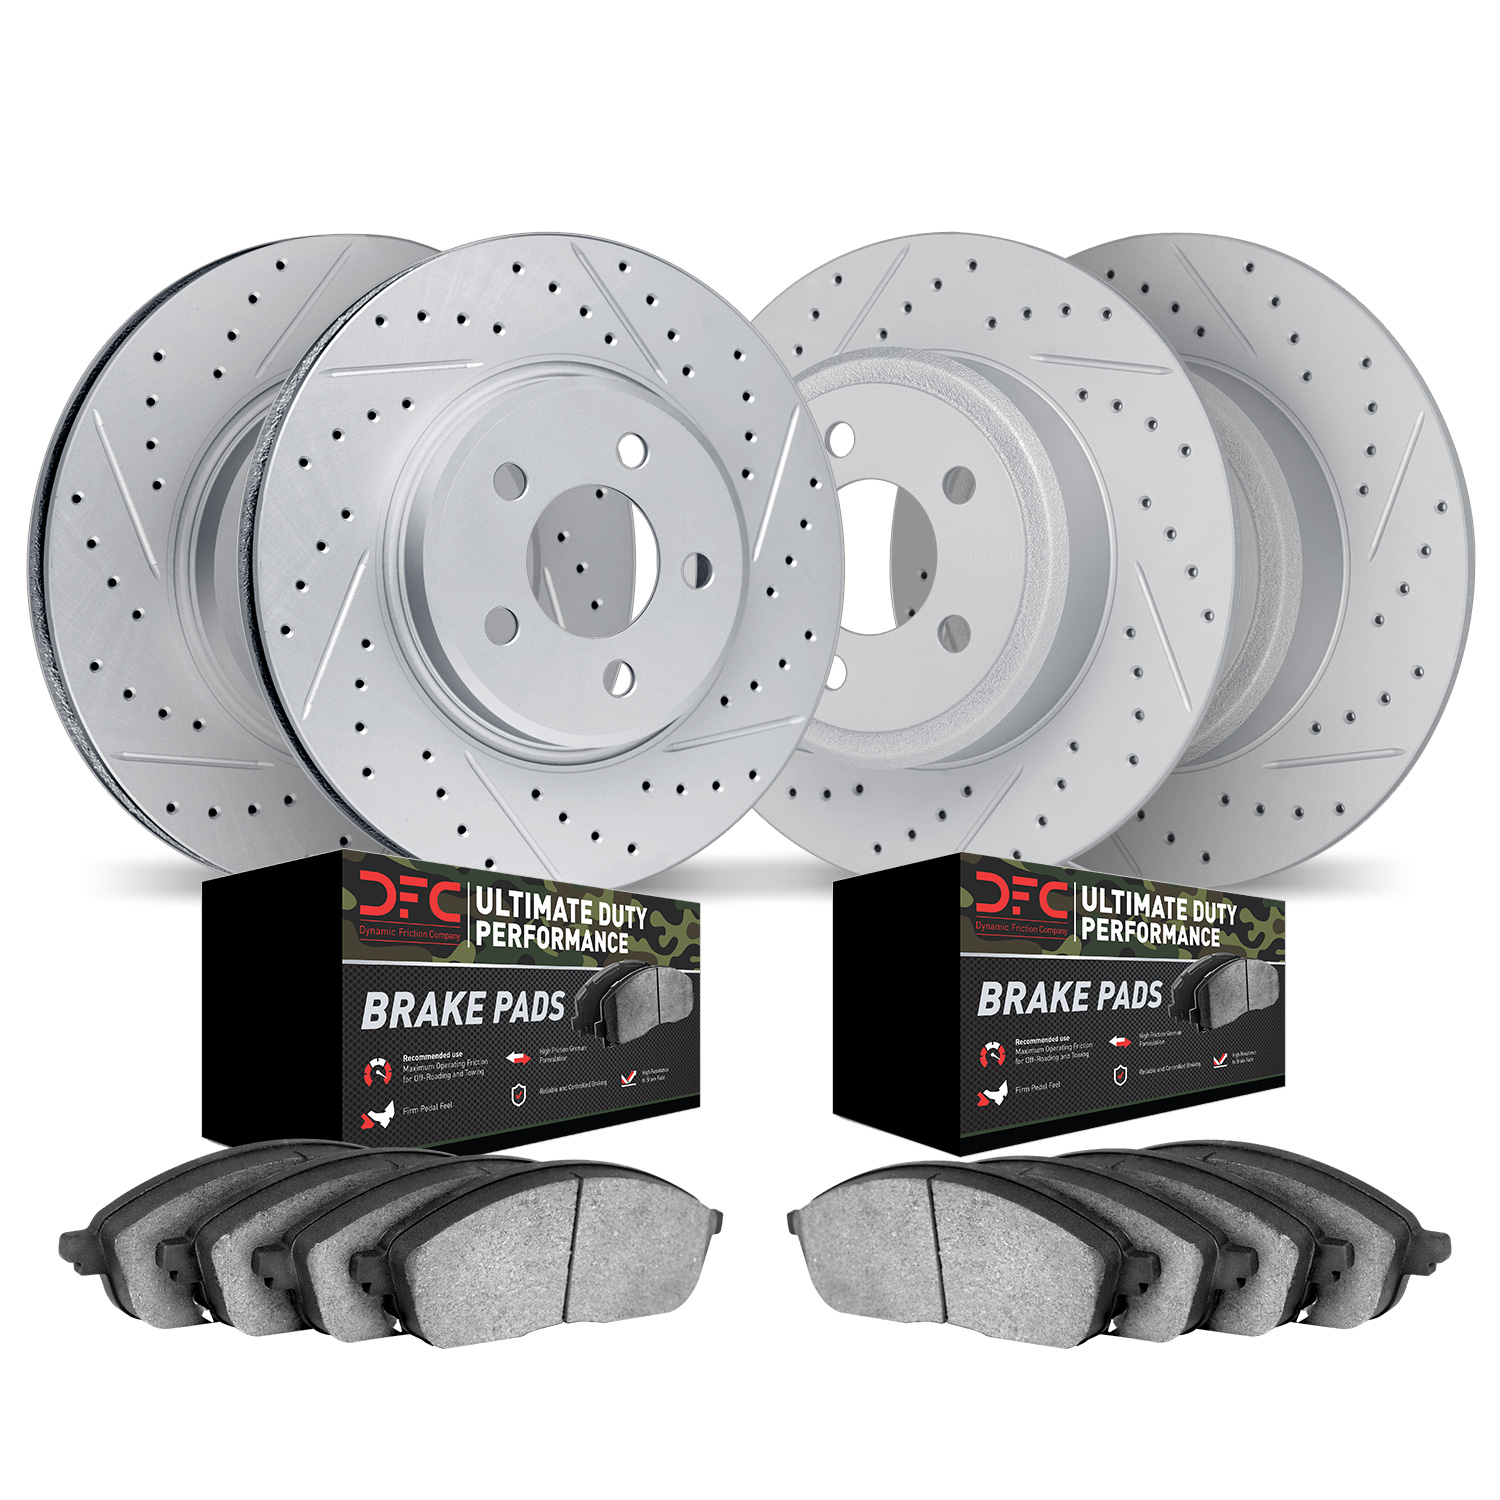 2404-42018 Geoperformance Drilled/Slotted Brake Rotors with Ultimate-Duty Brake Pads Kit, Fits Select Mopar, Position: Front and